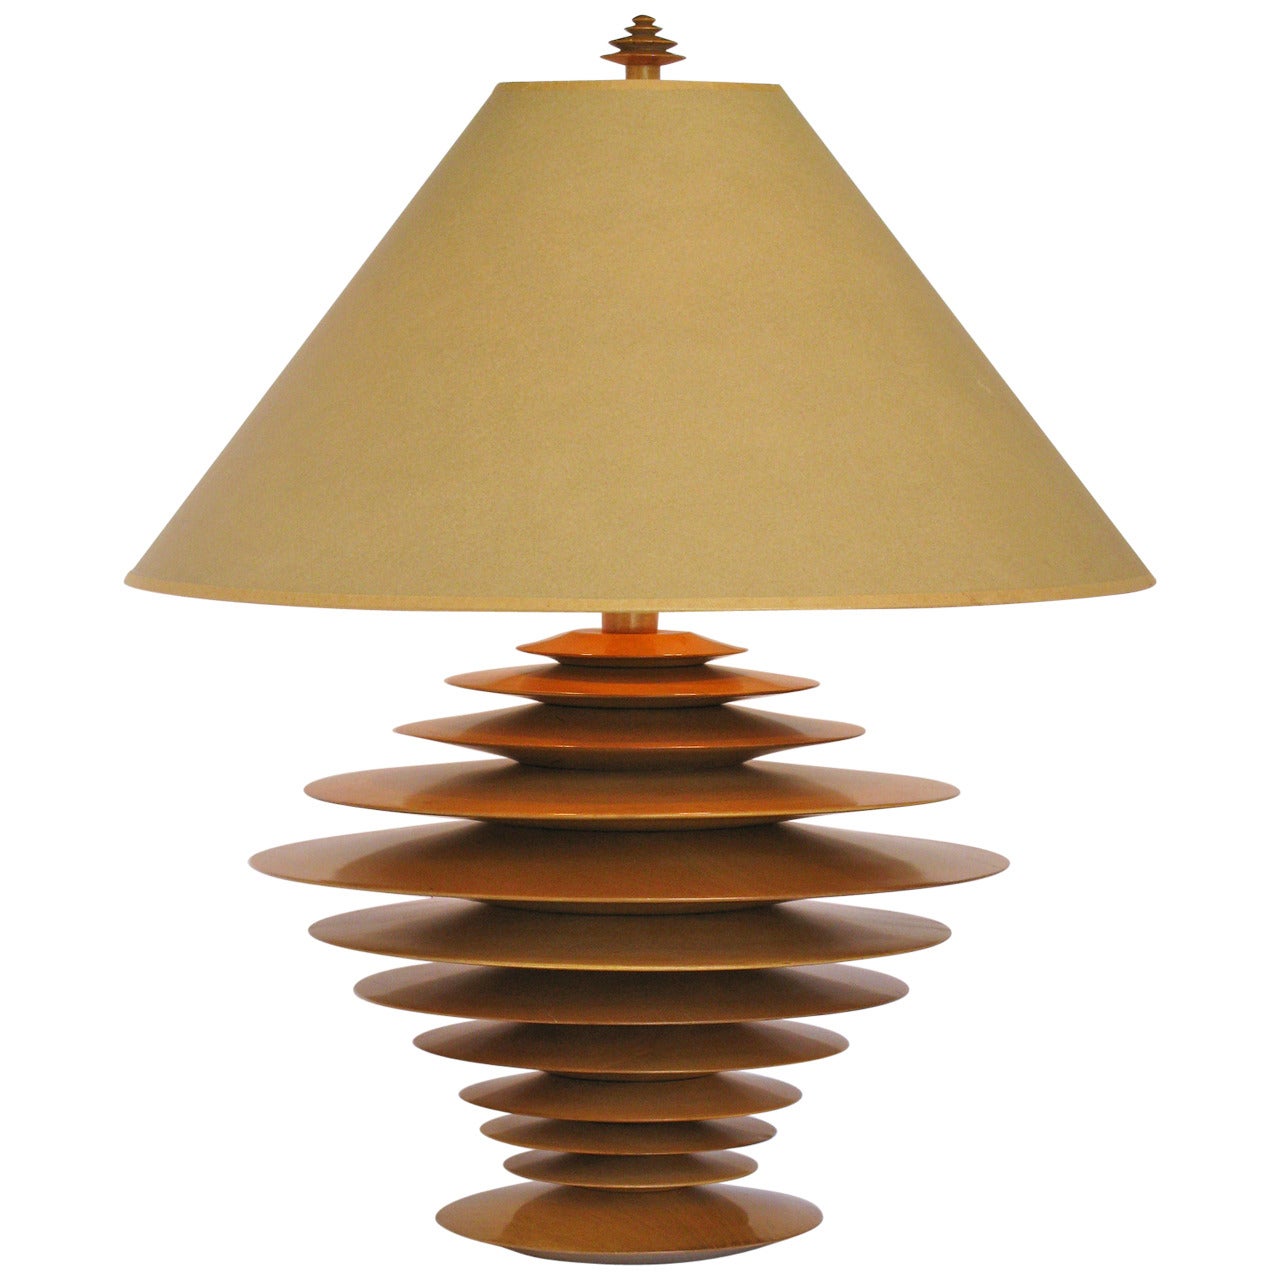 Discus Table Lamp by Shepard Vineburg